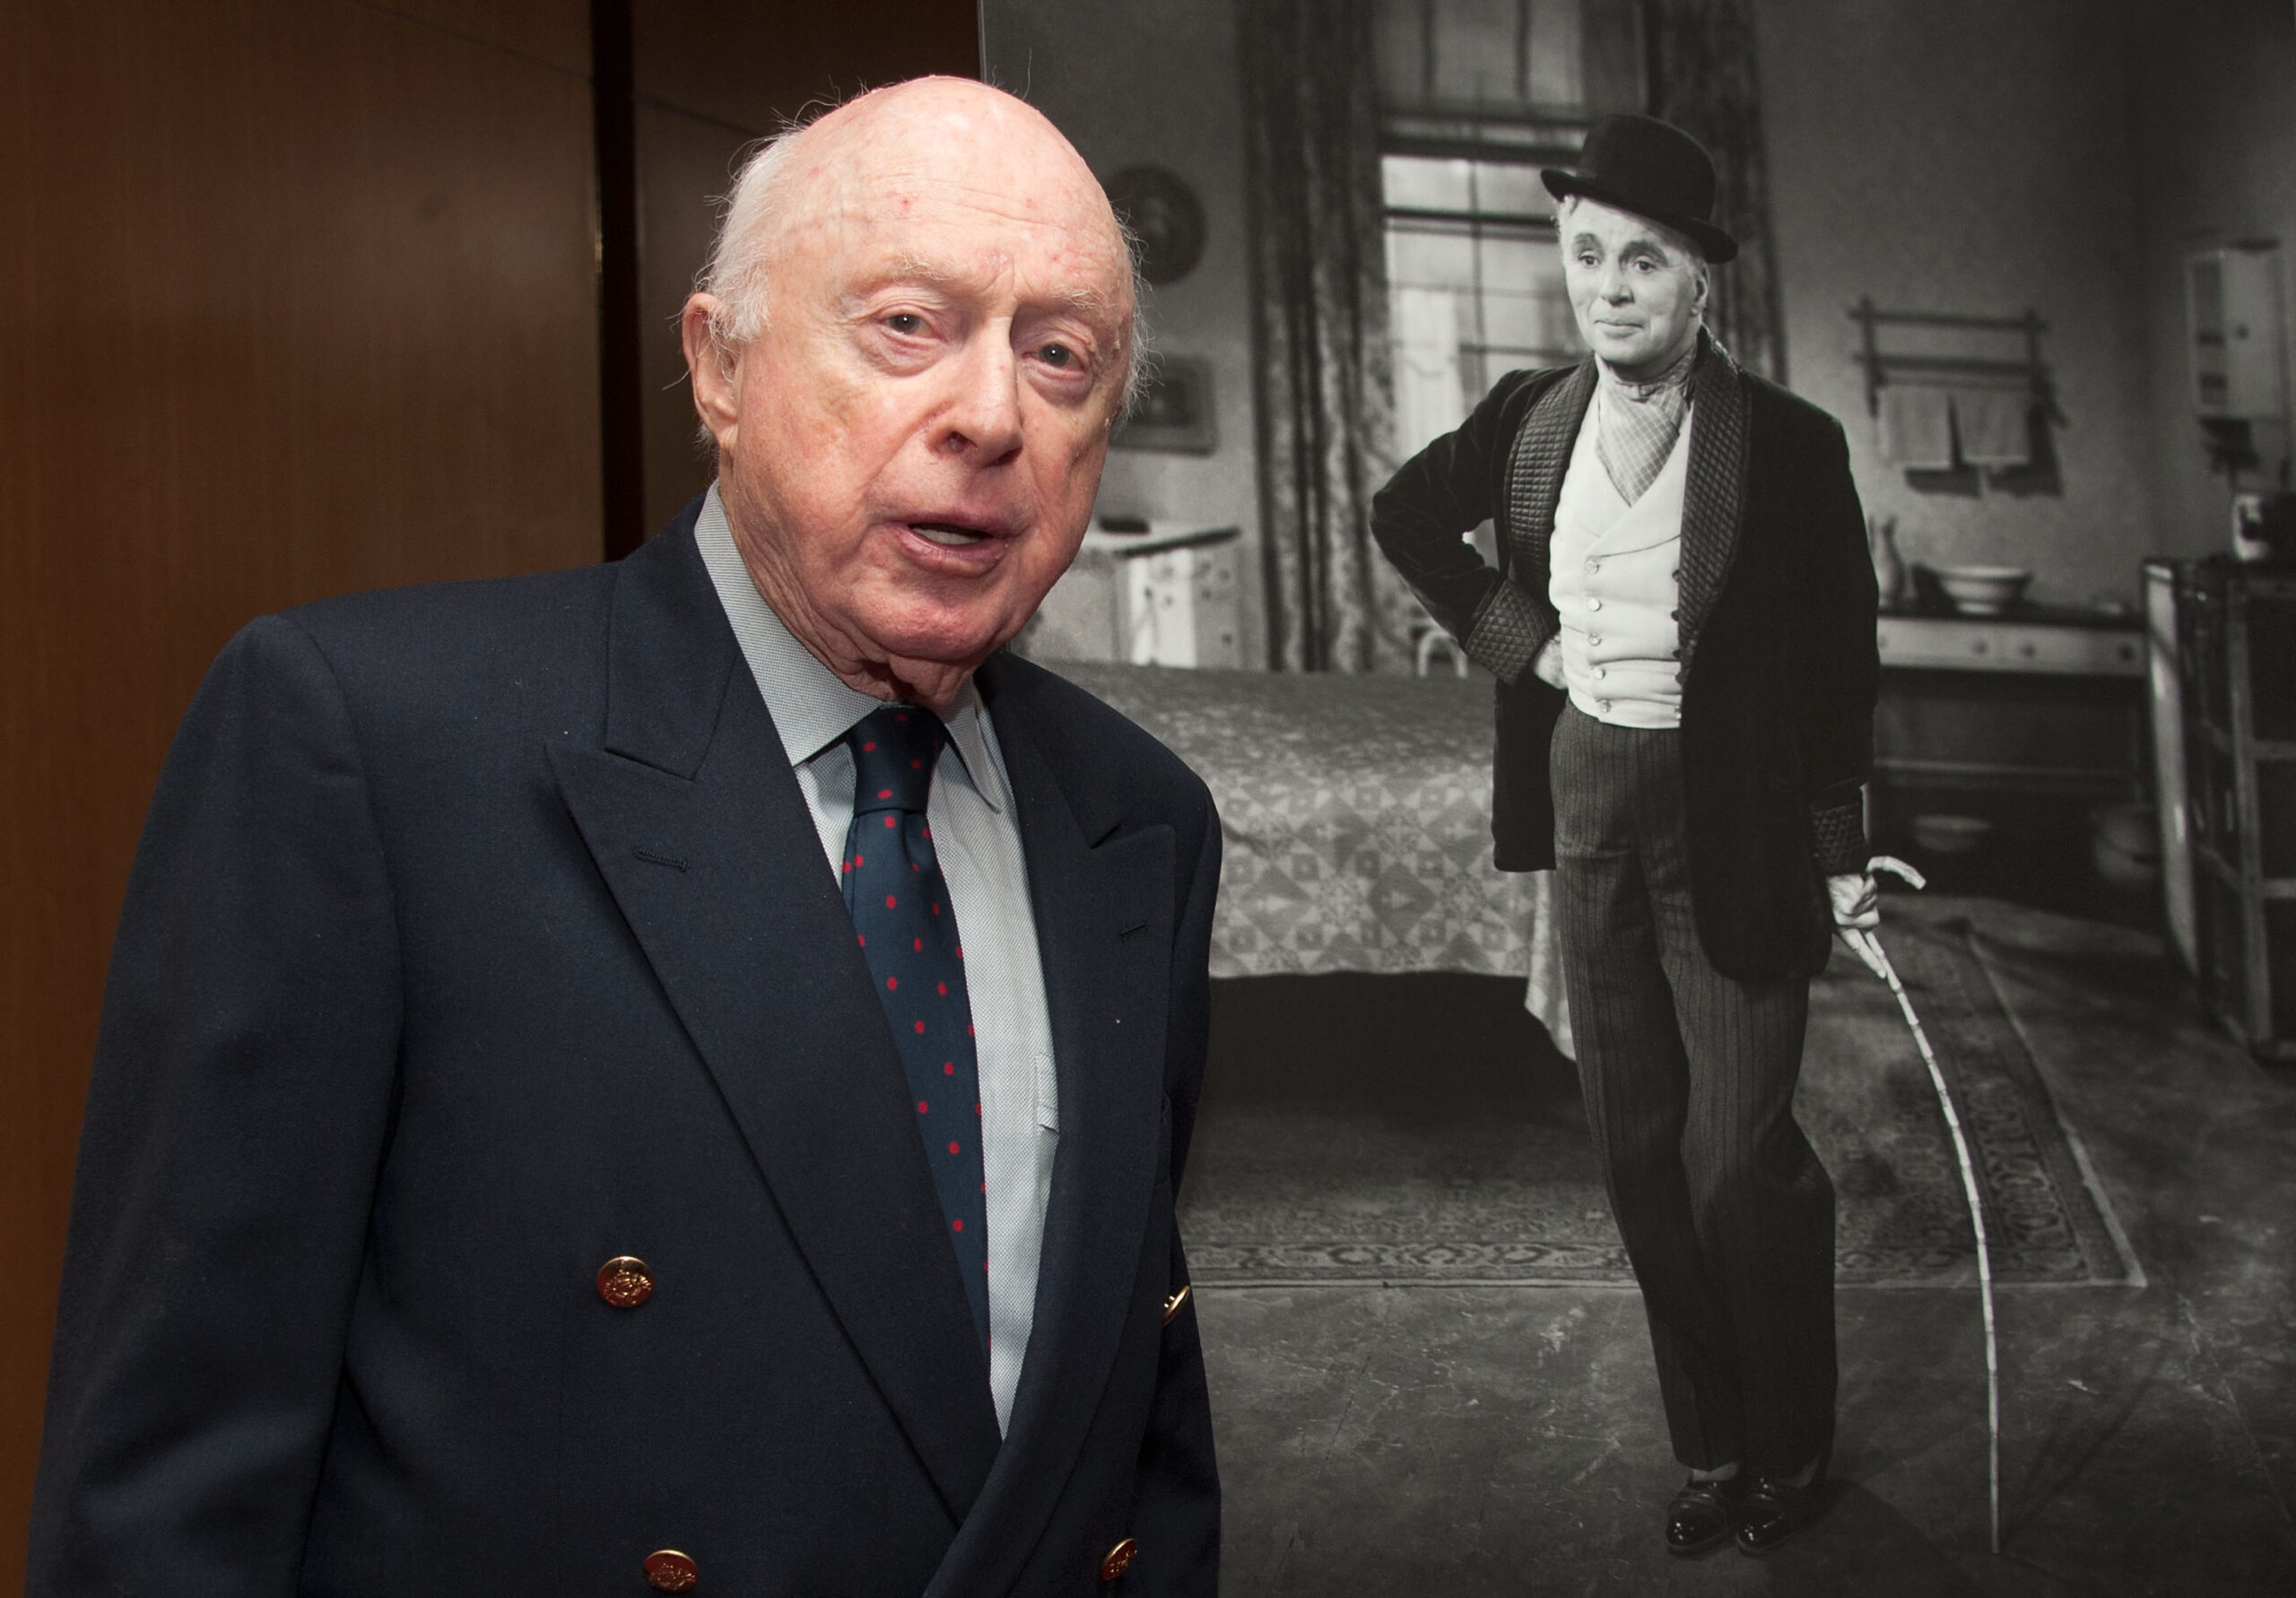 BEVERLY HILLS, CA - OCTOBER 03: Actor Norman Lloyd attends The Academy Of Motion Picture Arts And Sciences' Presents The 60th Anniversary Screening Of "Limelight" at AMPAS Samuel Goldwyn Theater on October 3, 2012 in Beverly Hills, California. (Photo by Valerie Macon/Getty Images)